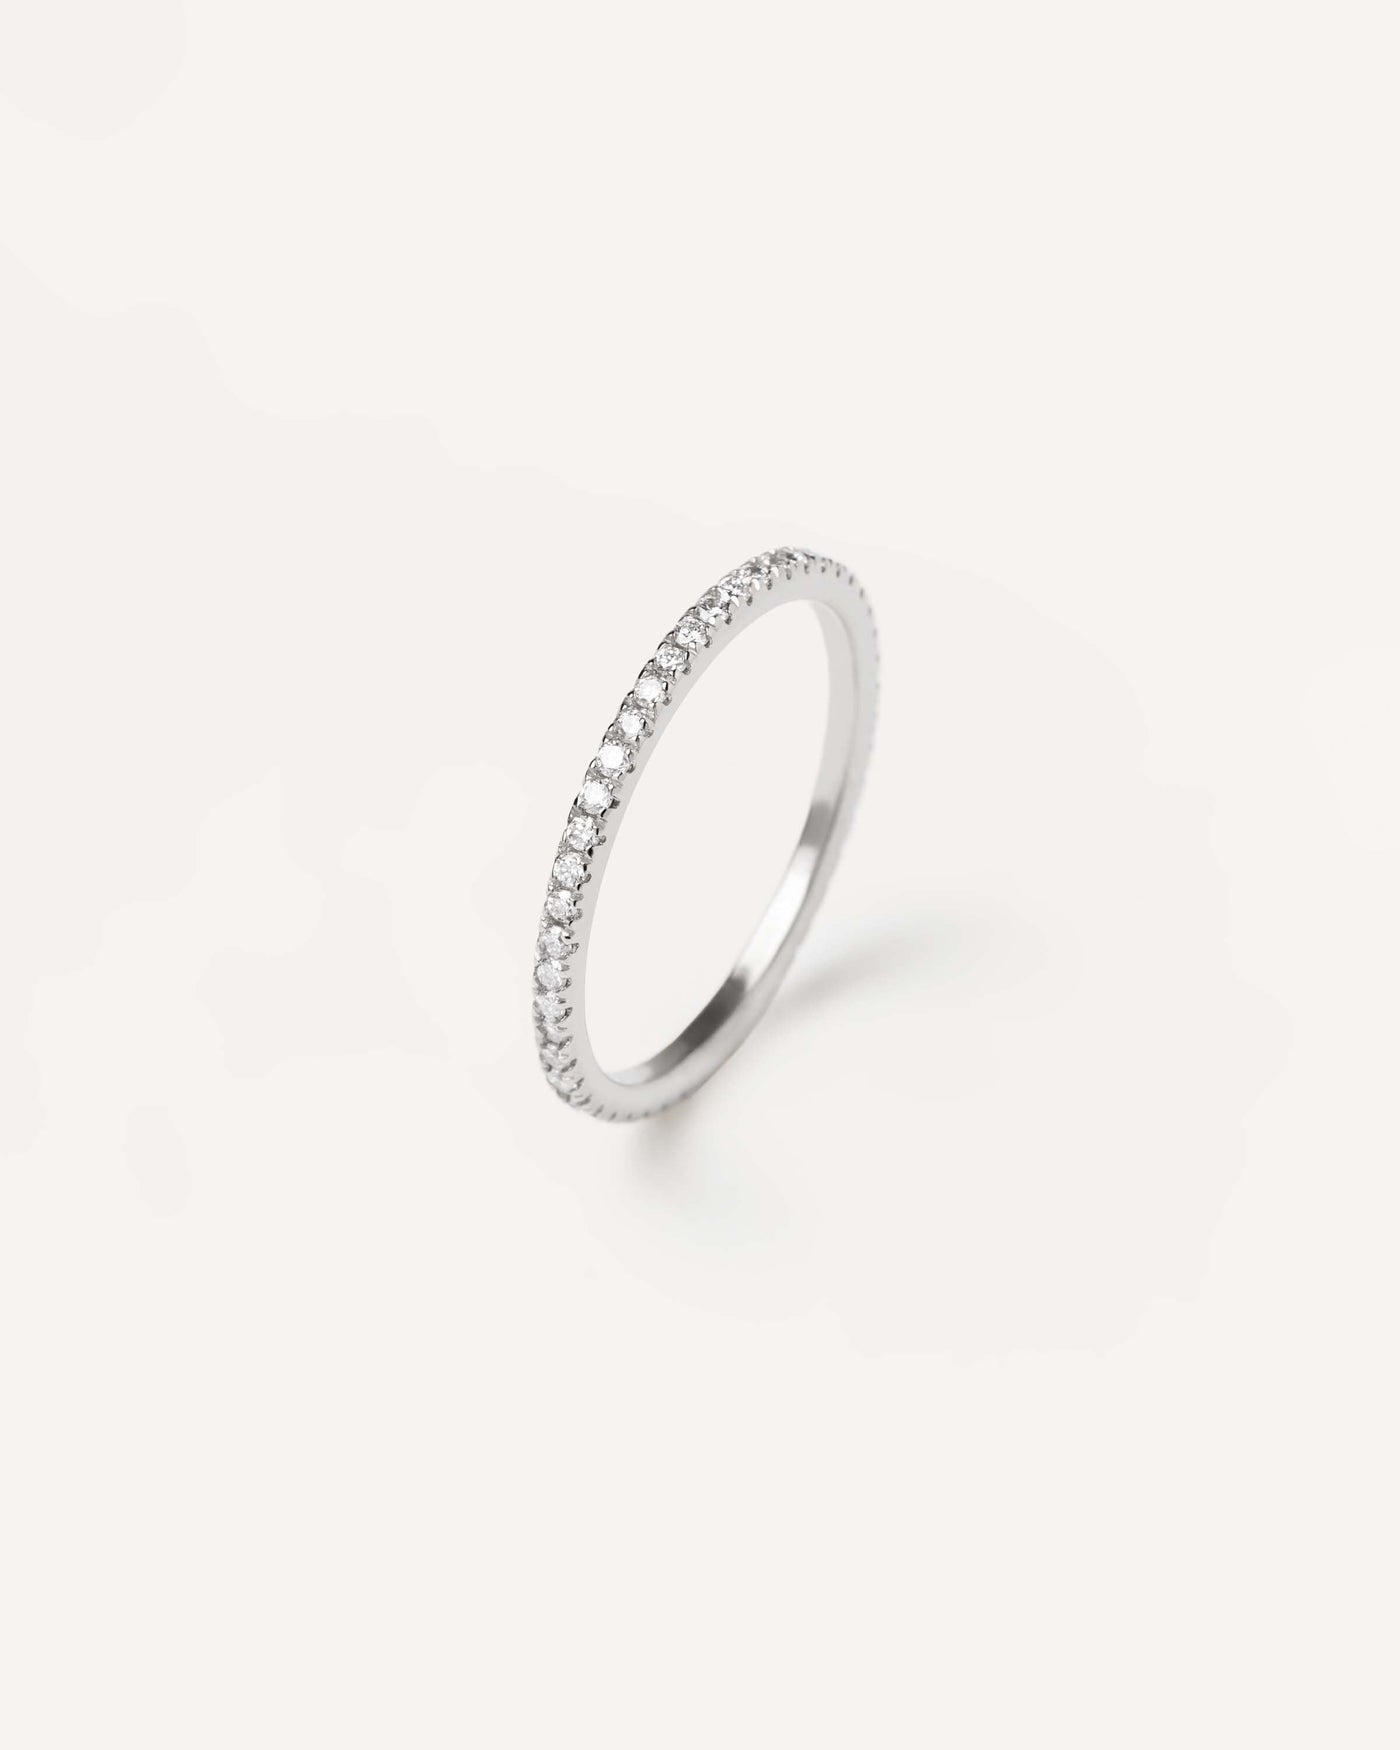 2023 Selection | Diamonds and White Gold Eternity Mini Ring. 18K white gold eternity ring, set with small lab-grown diamonds, equaling 0.51 carats. Get the latest arrival from PDPAOLA. Place your order safely and get this Best Seller. Free Shipping.